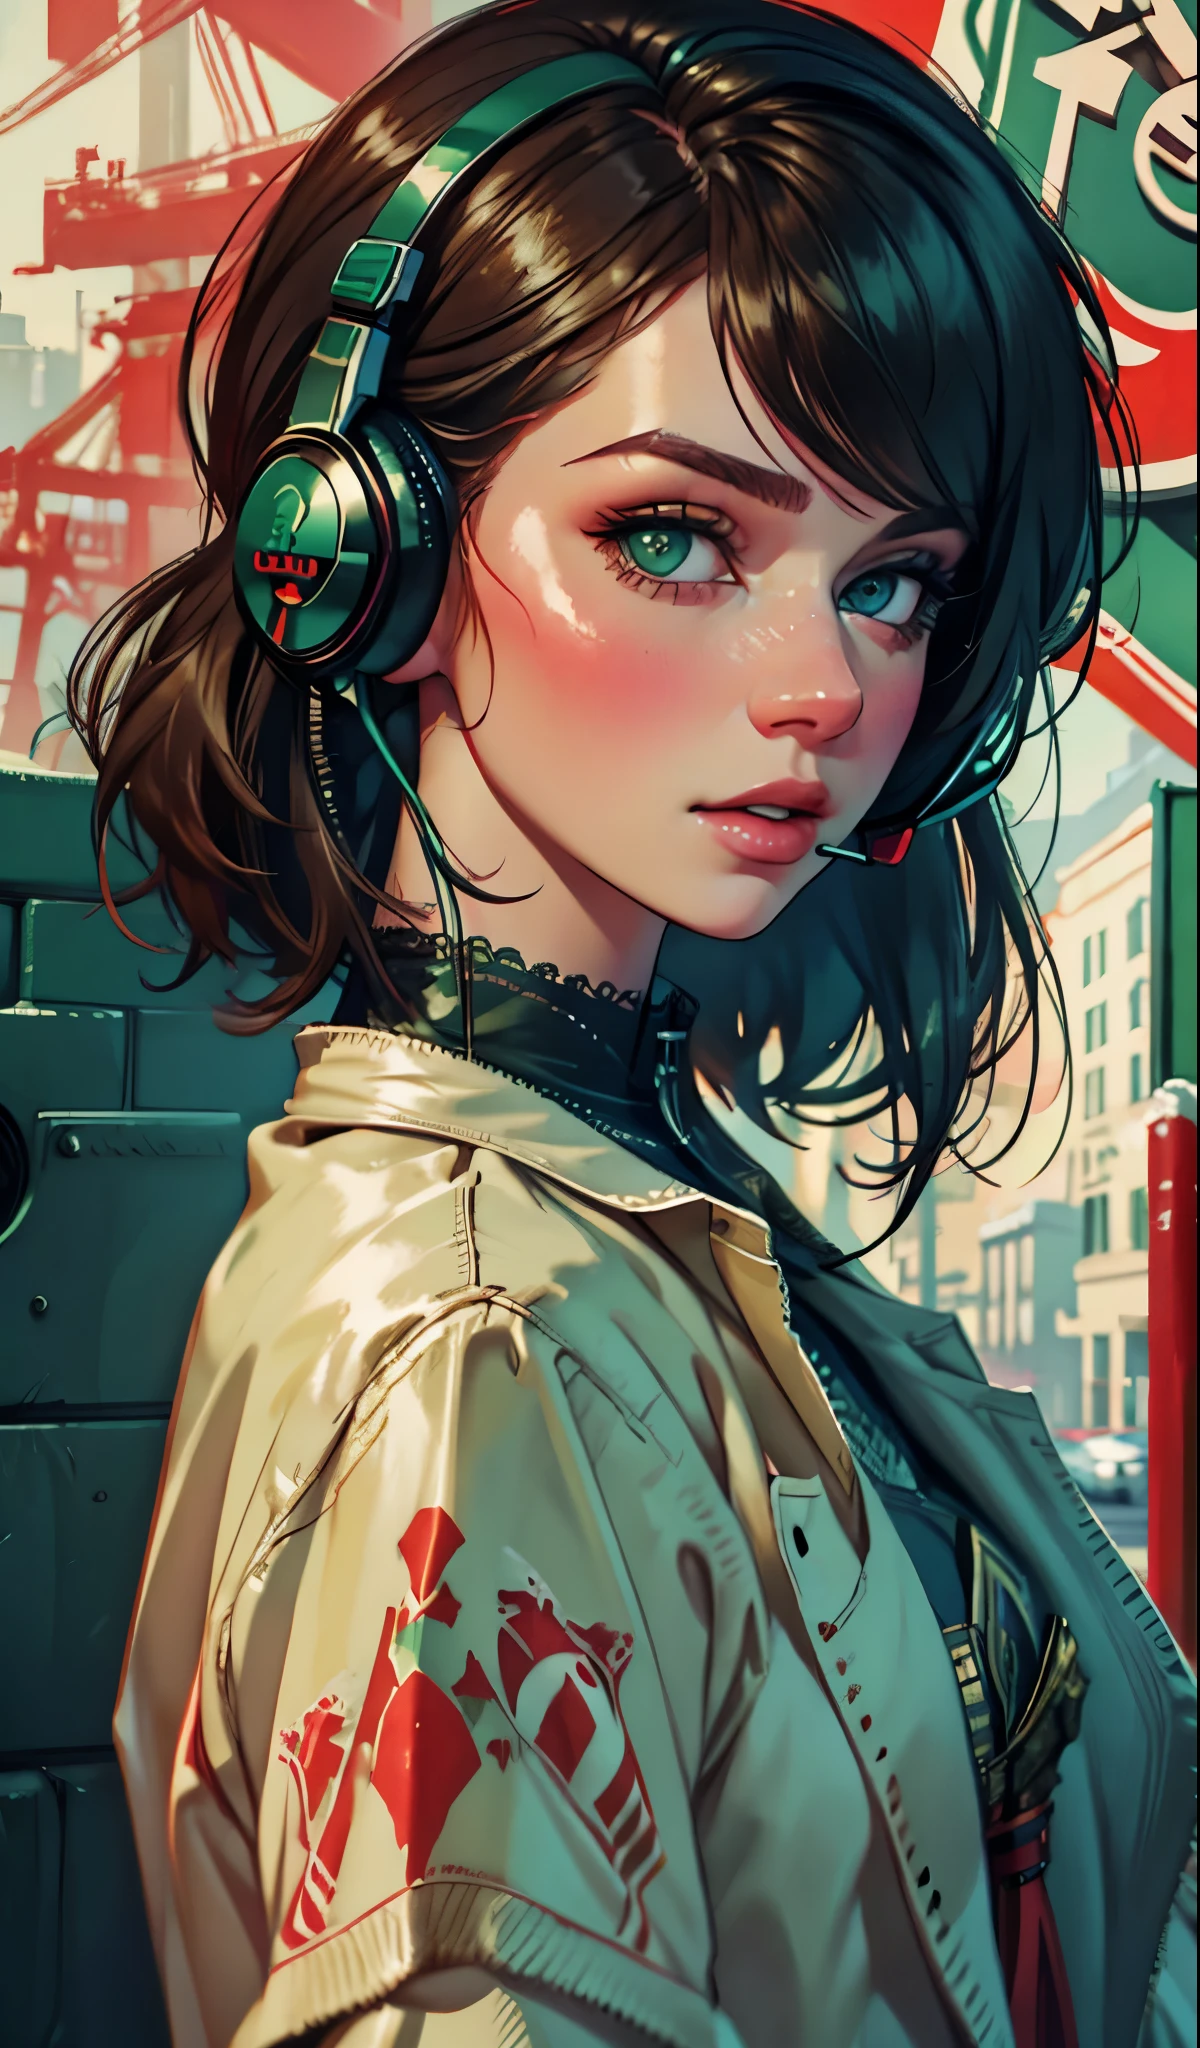 model girl wearing headphones, city background, emerald green eyes, intricate details, aesthetically pleasing pastel colors, poster background, art by conrad roset and ilya kuvshinov